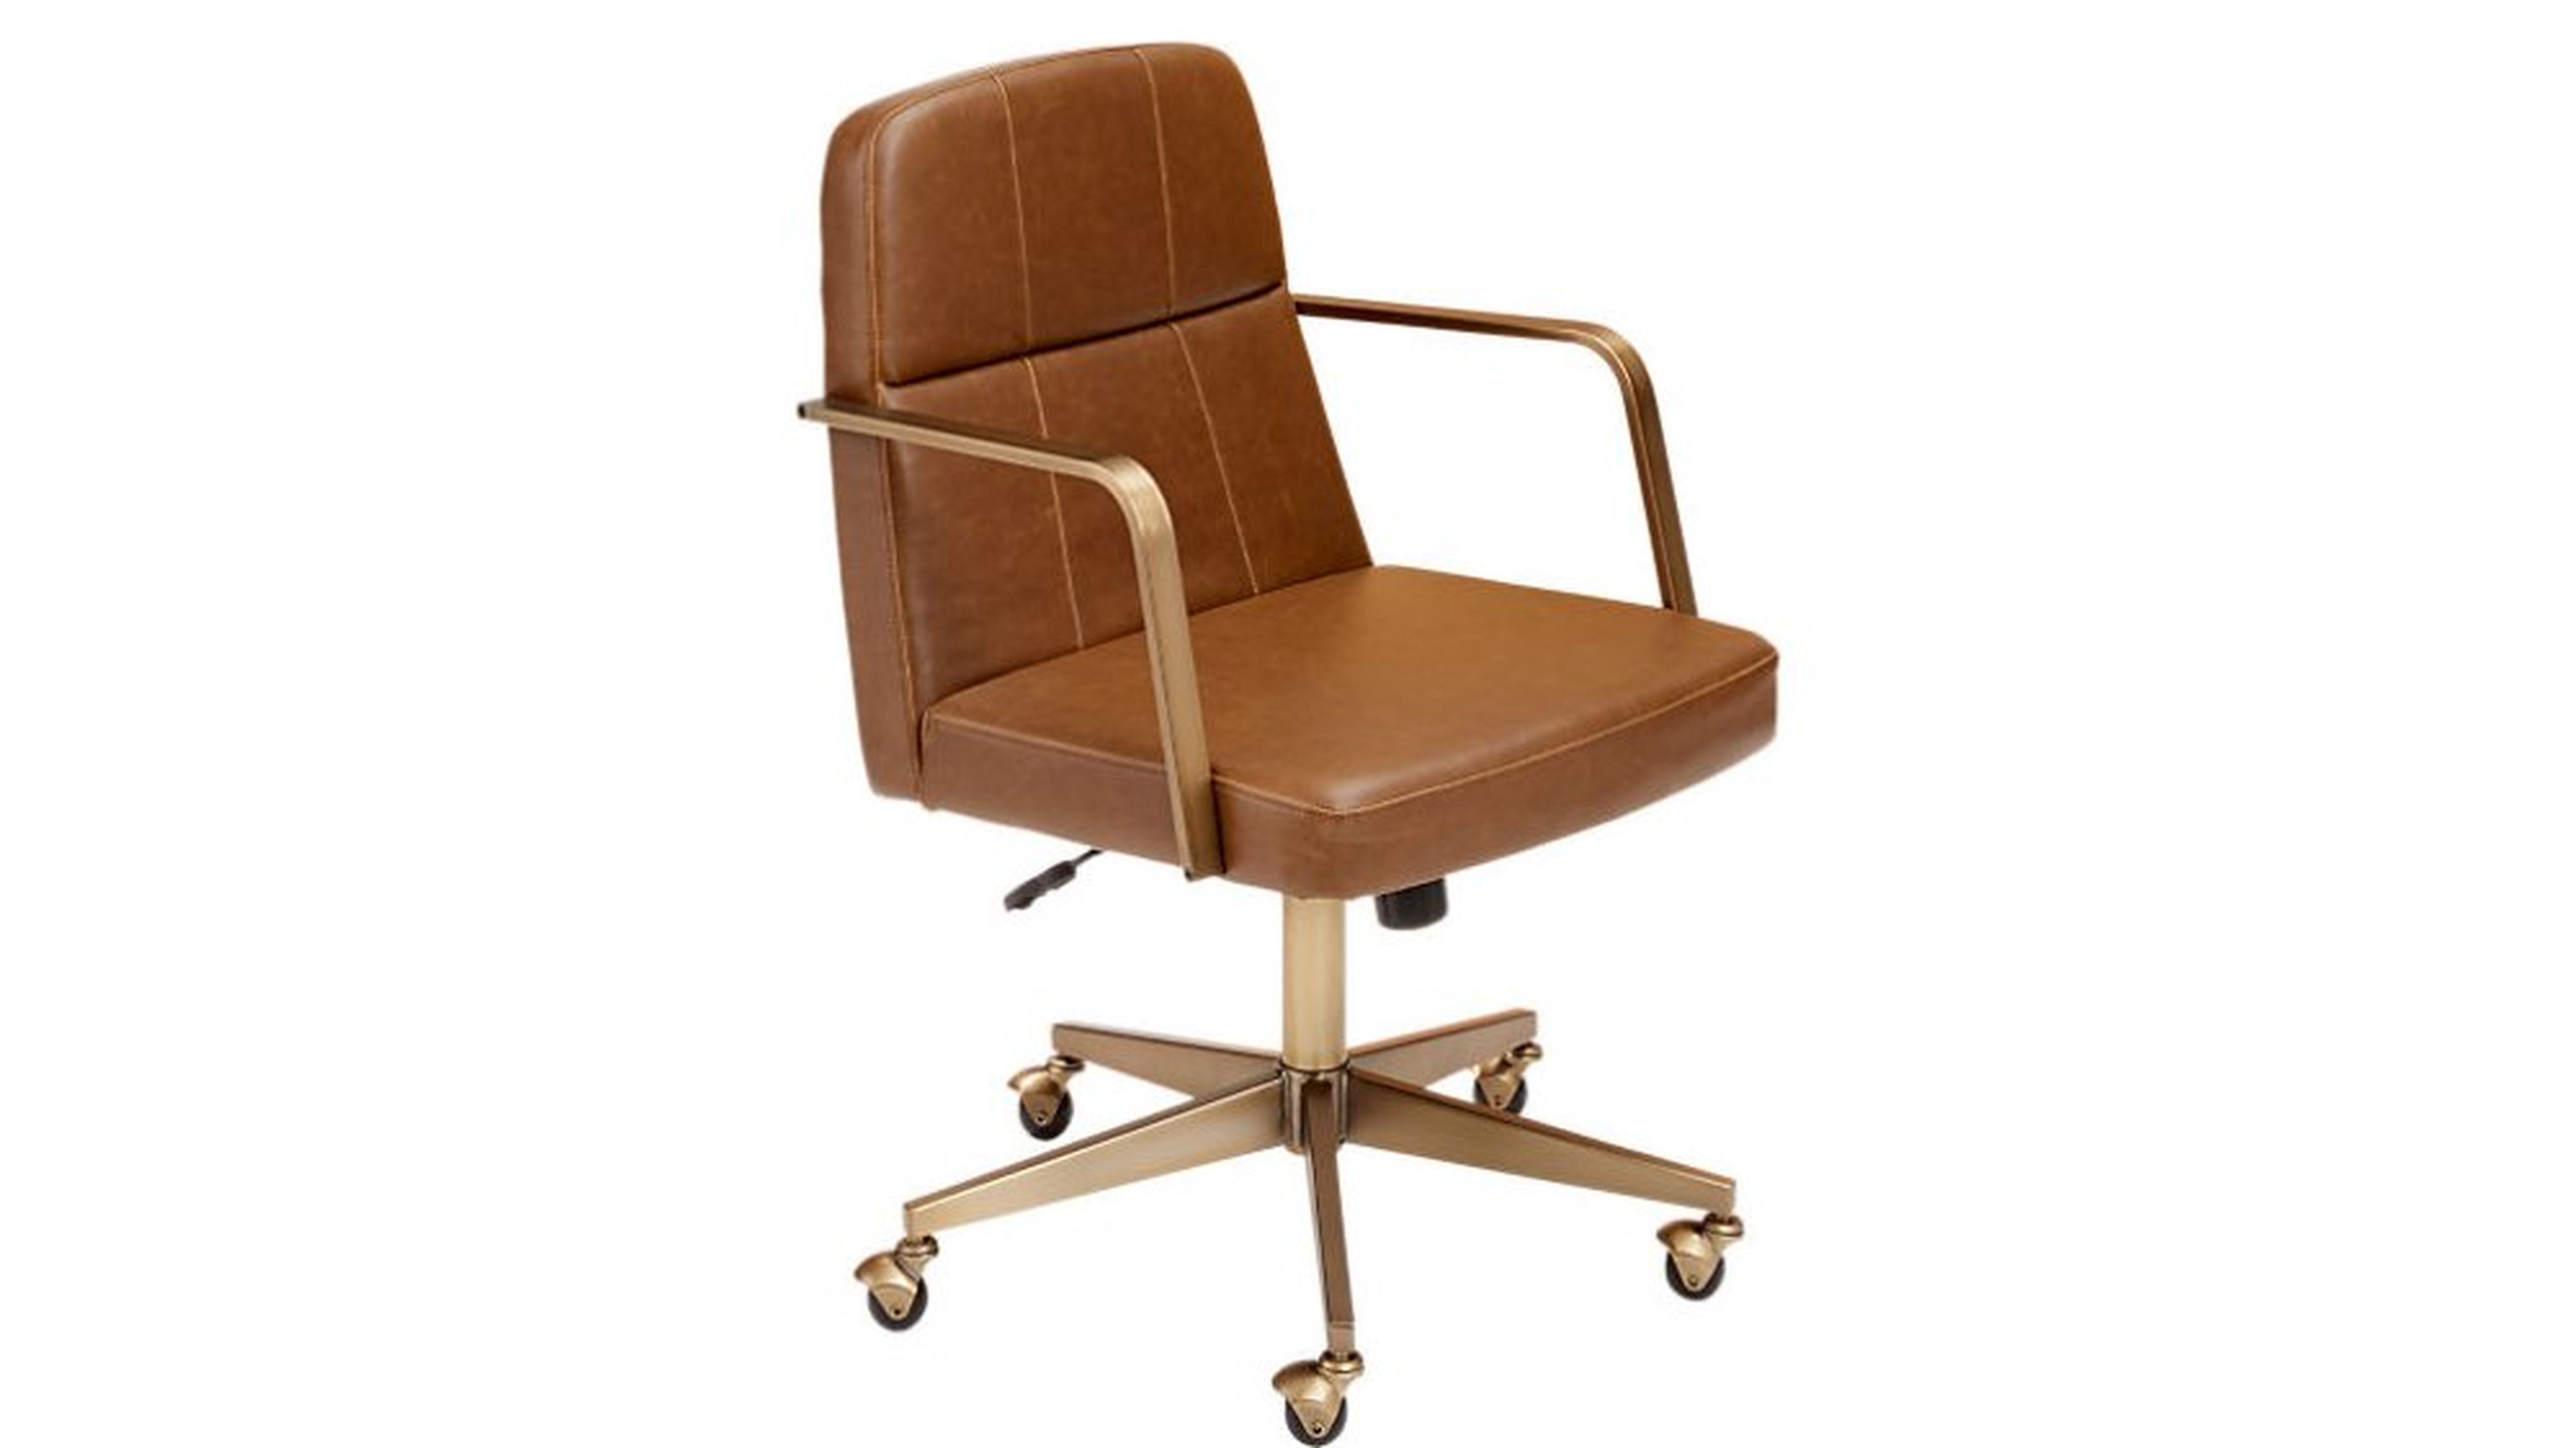 Draper Faux Leather Office Chair - CB2